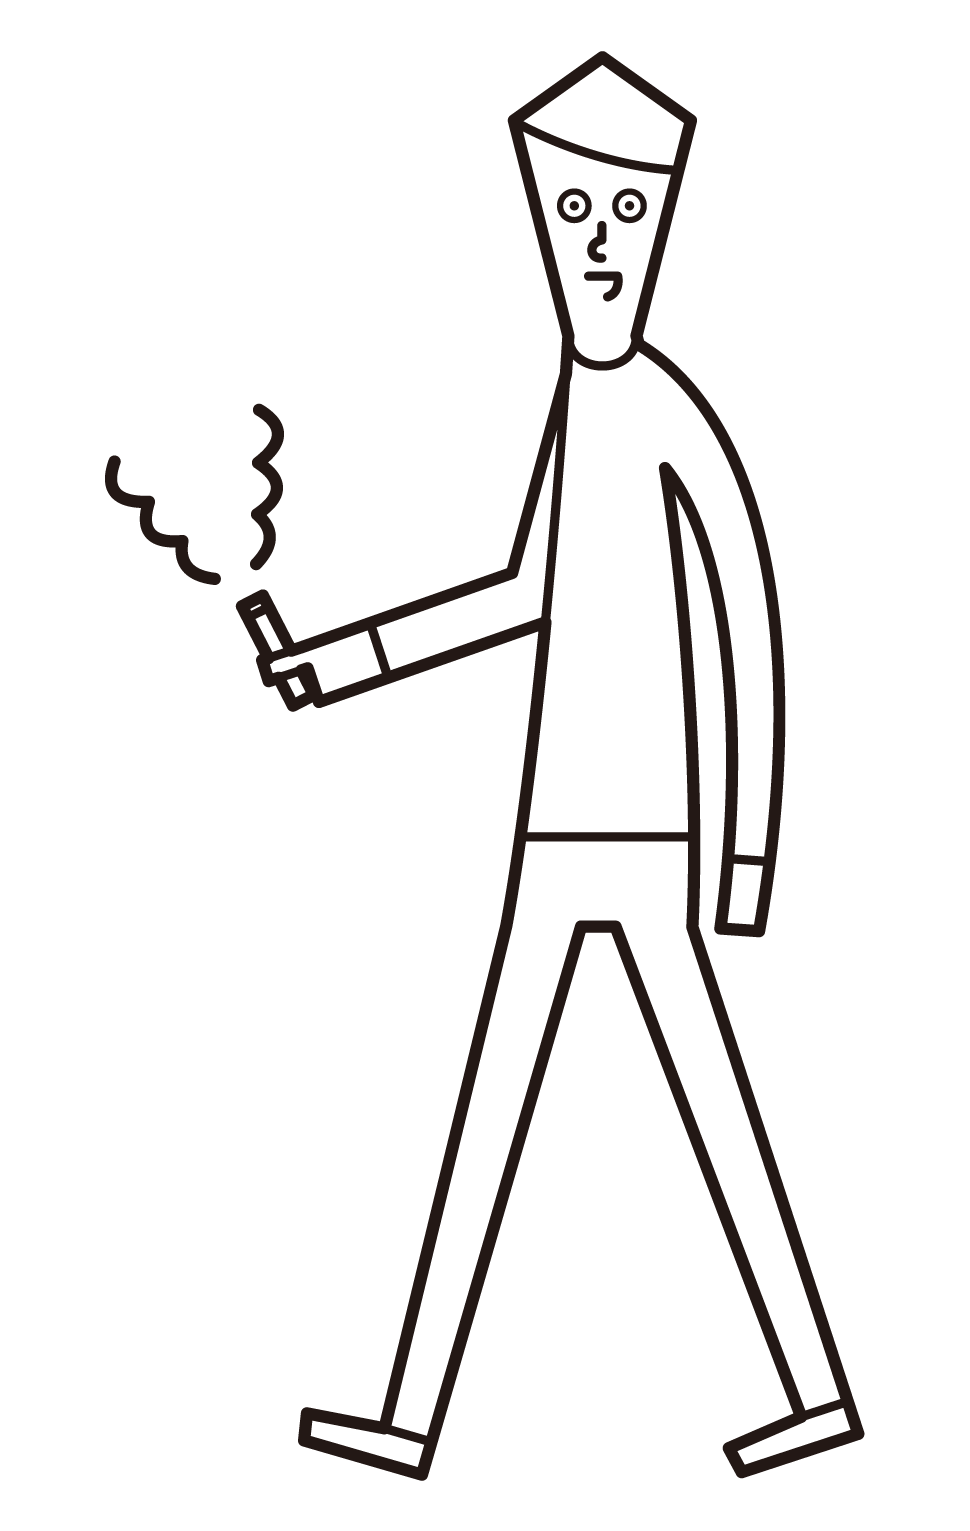 Illustration of a man smoking a cigarette while walking